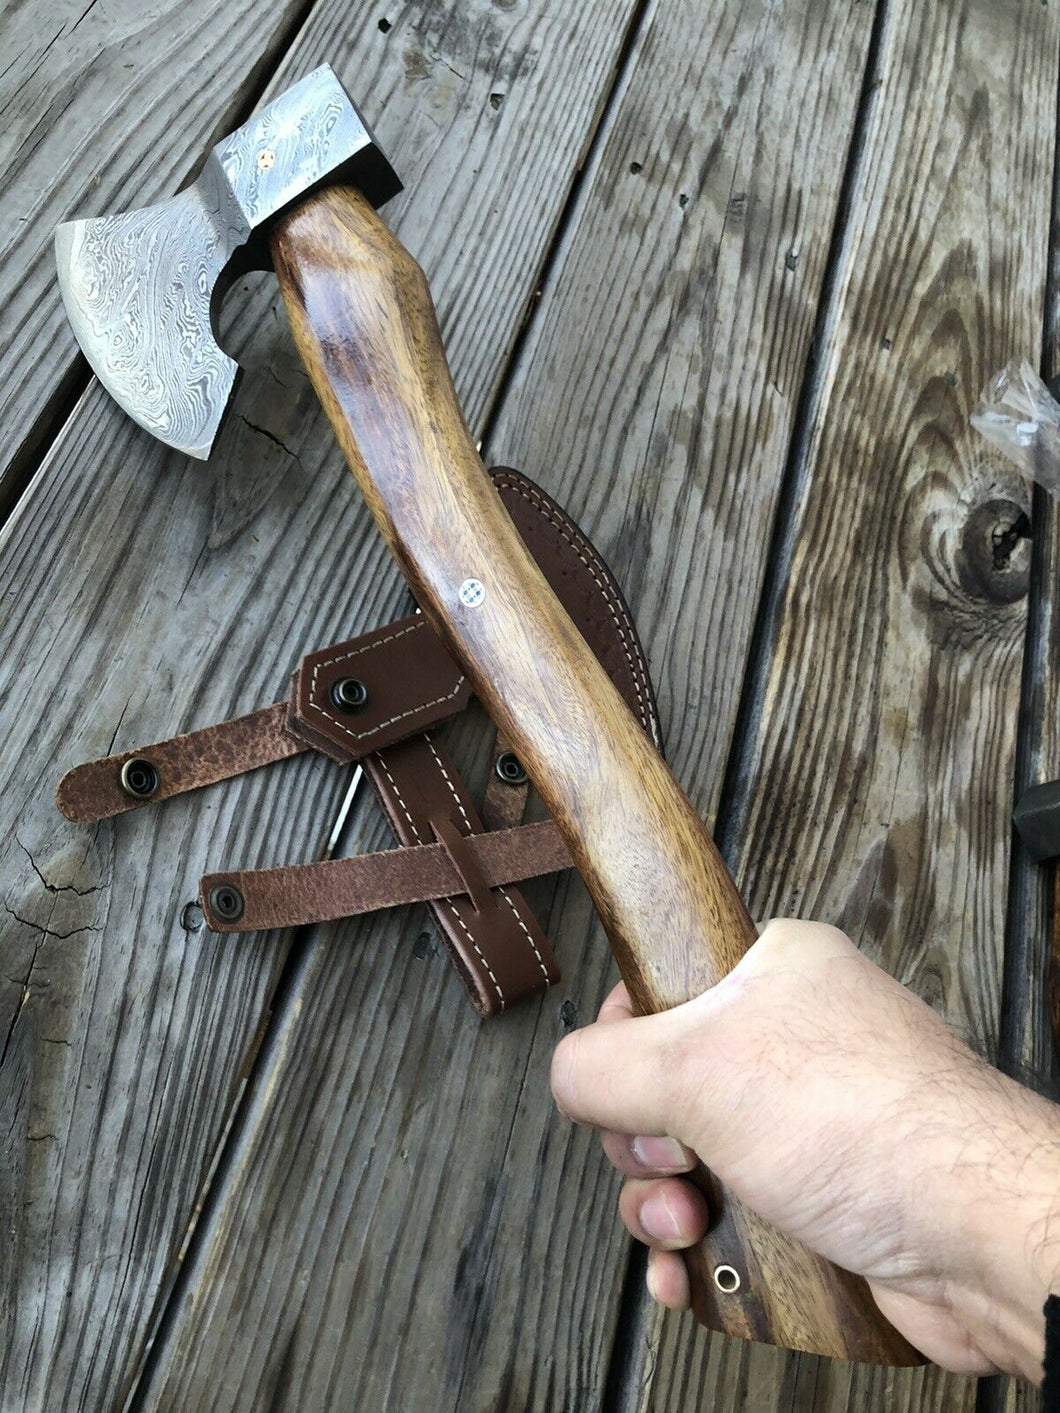 Custom HAND FORGED DAMASCUS STEEL FULL TANG Axe - SUSA KNIVES